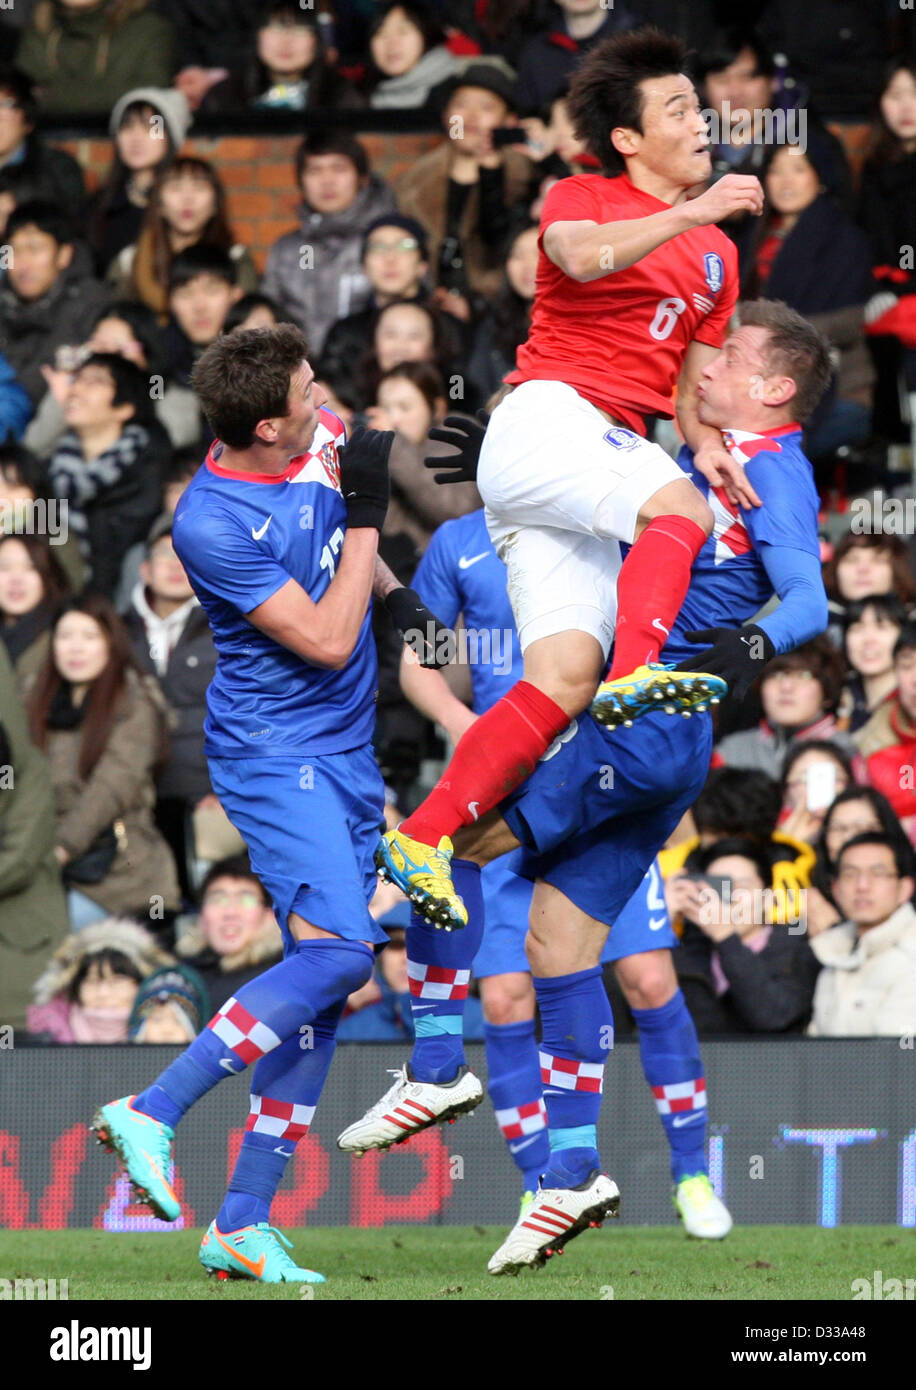 06.02.2013. London, England. South Korea's Shin Hyung-Min  and Croatia's Ivica Olic  in action during International Friendly game between Croatia and South Korea from Craven Cottage Stock Photo